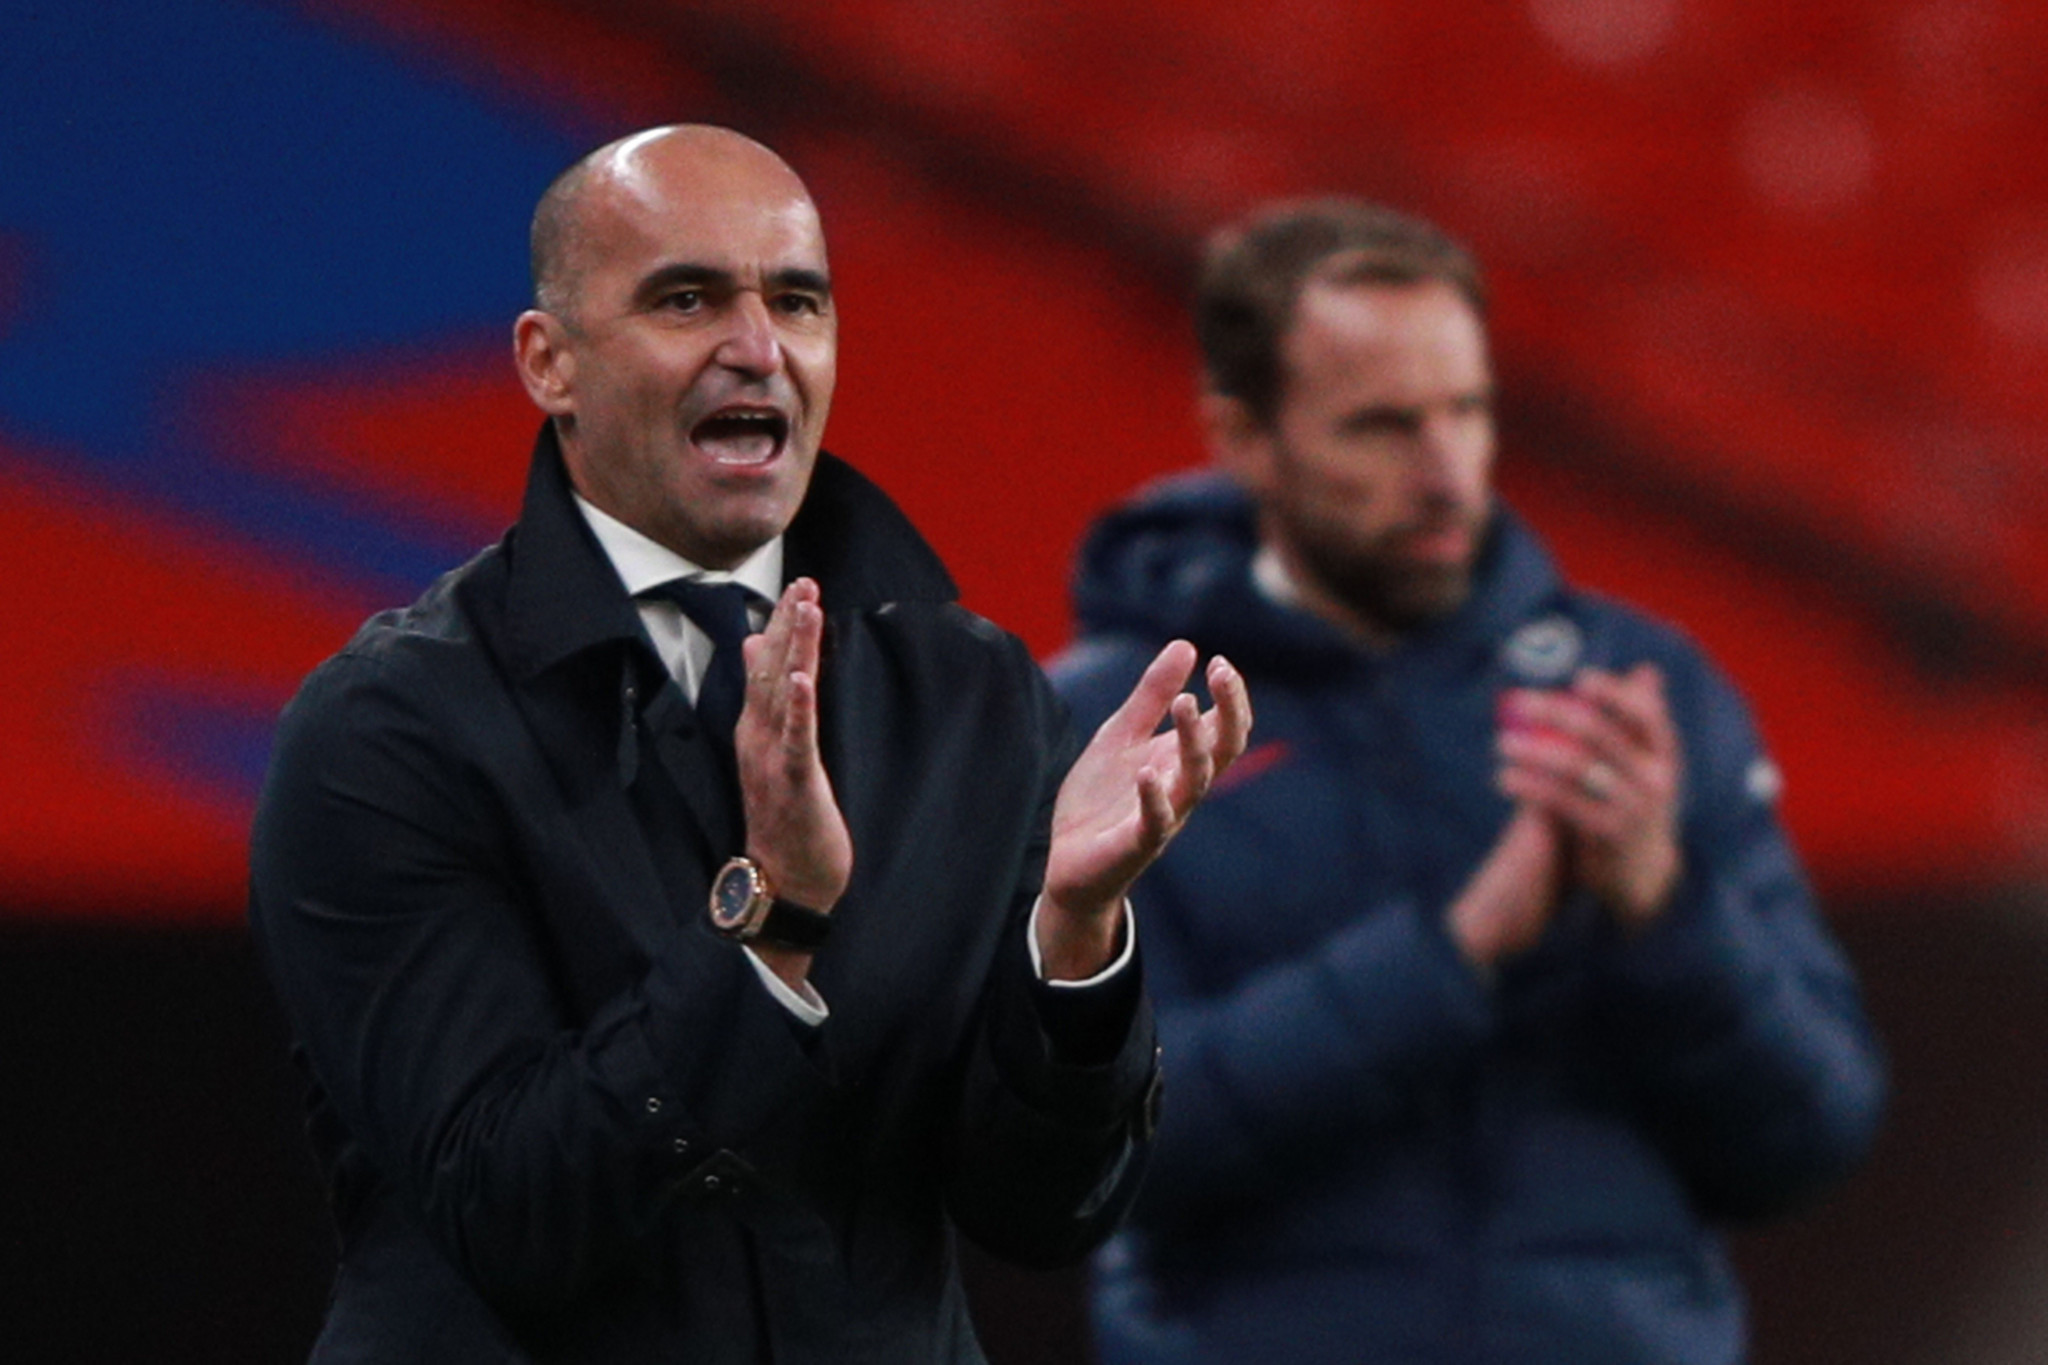 Belgium boss Roberto Martinez was among a number of coaches that called on UEFA to increase the size of squads to 26 due to COVID-19 ©Getty Images